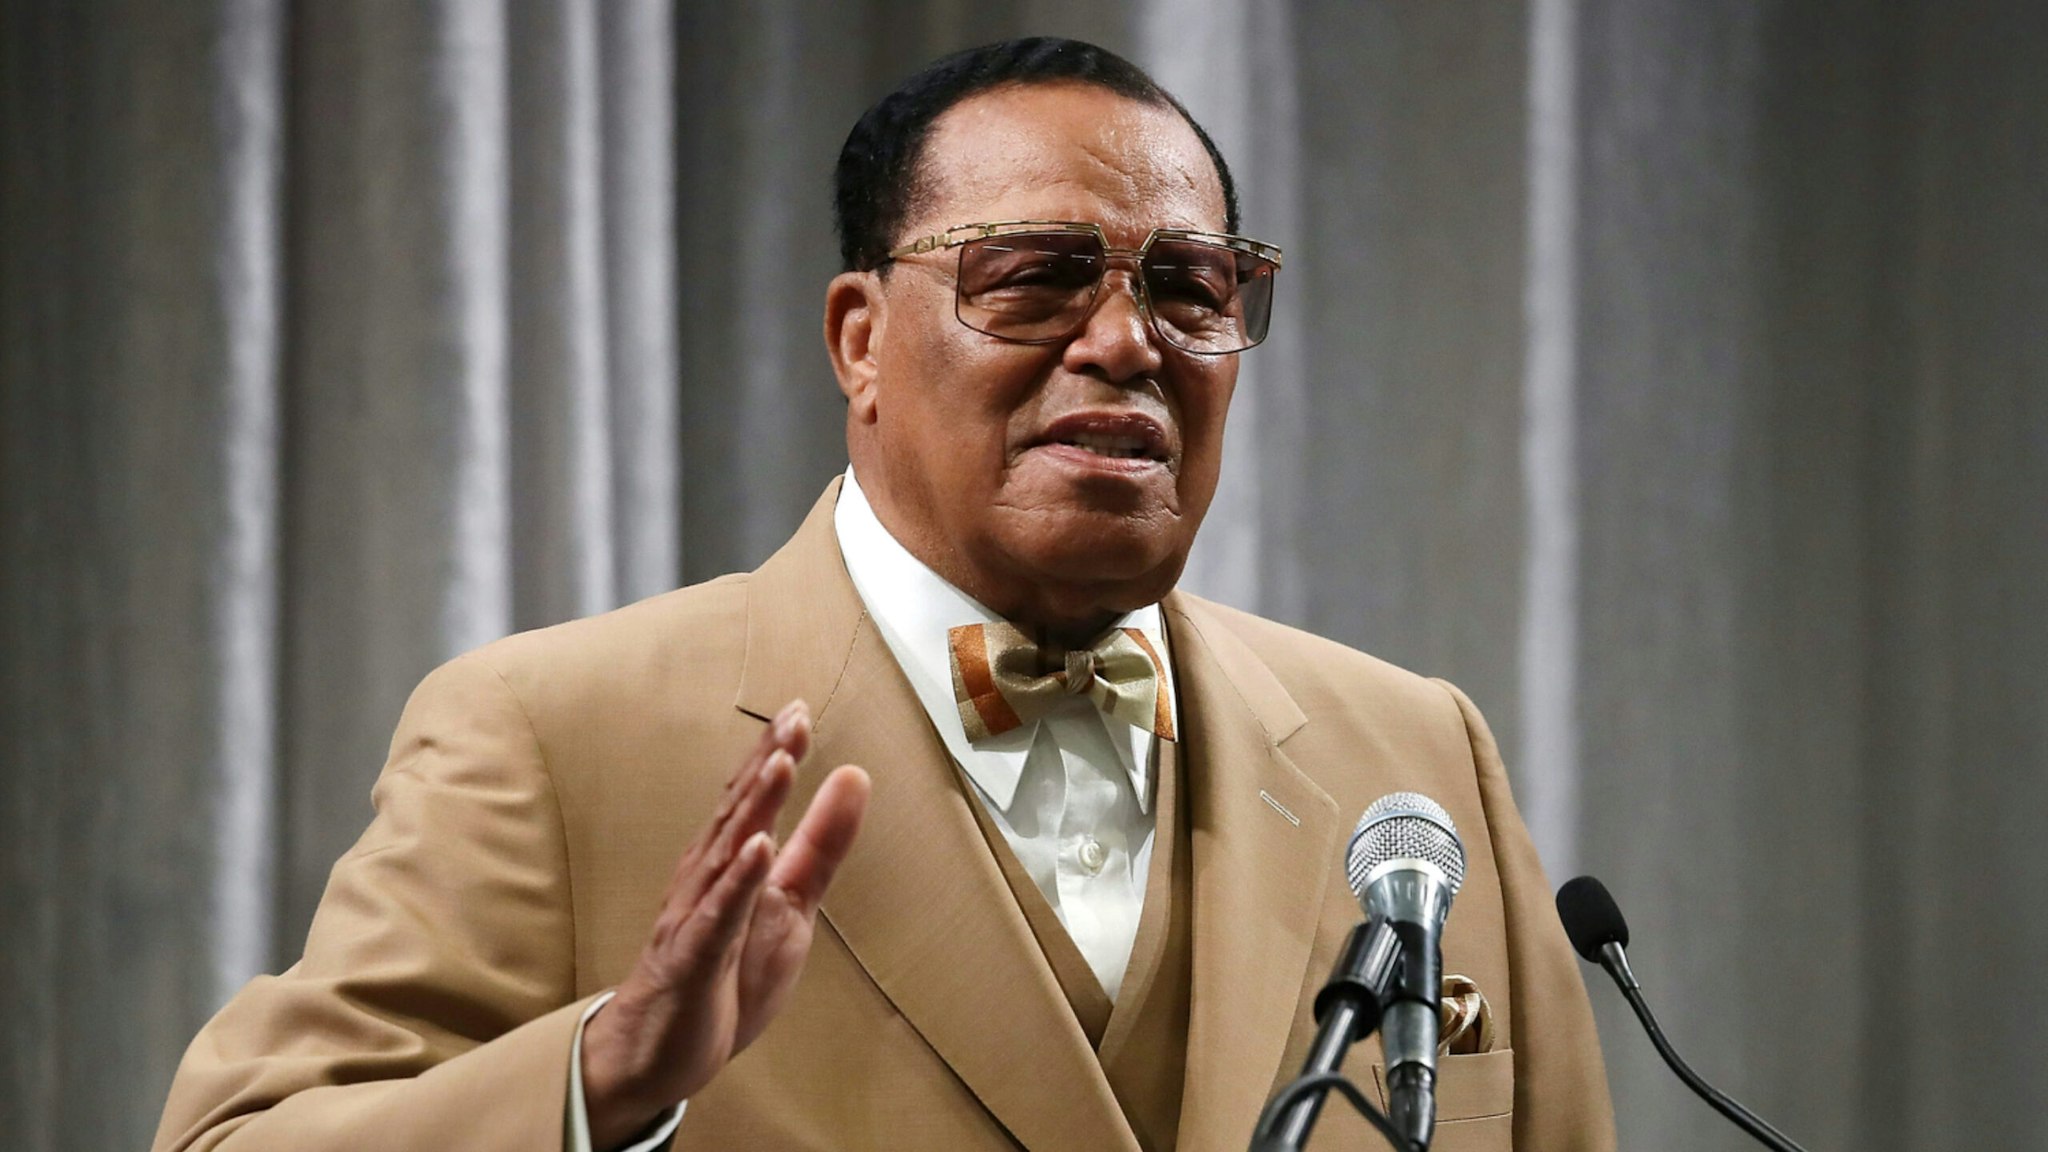 Nation of Islam Minister Louis Farrakhan delivers a speech and talks about U.S. President Donald Trump, at the Watergate Hotel, on November 16, 2017 in Washington, DC.